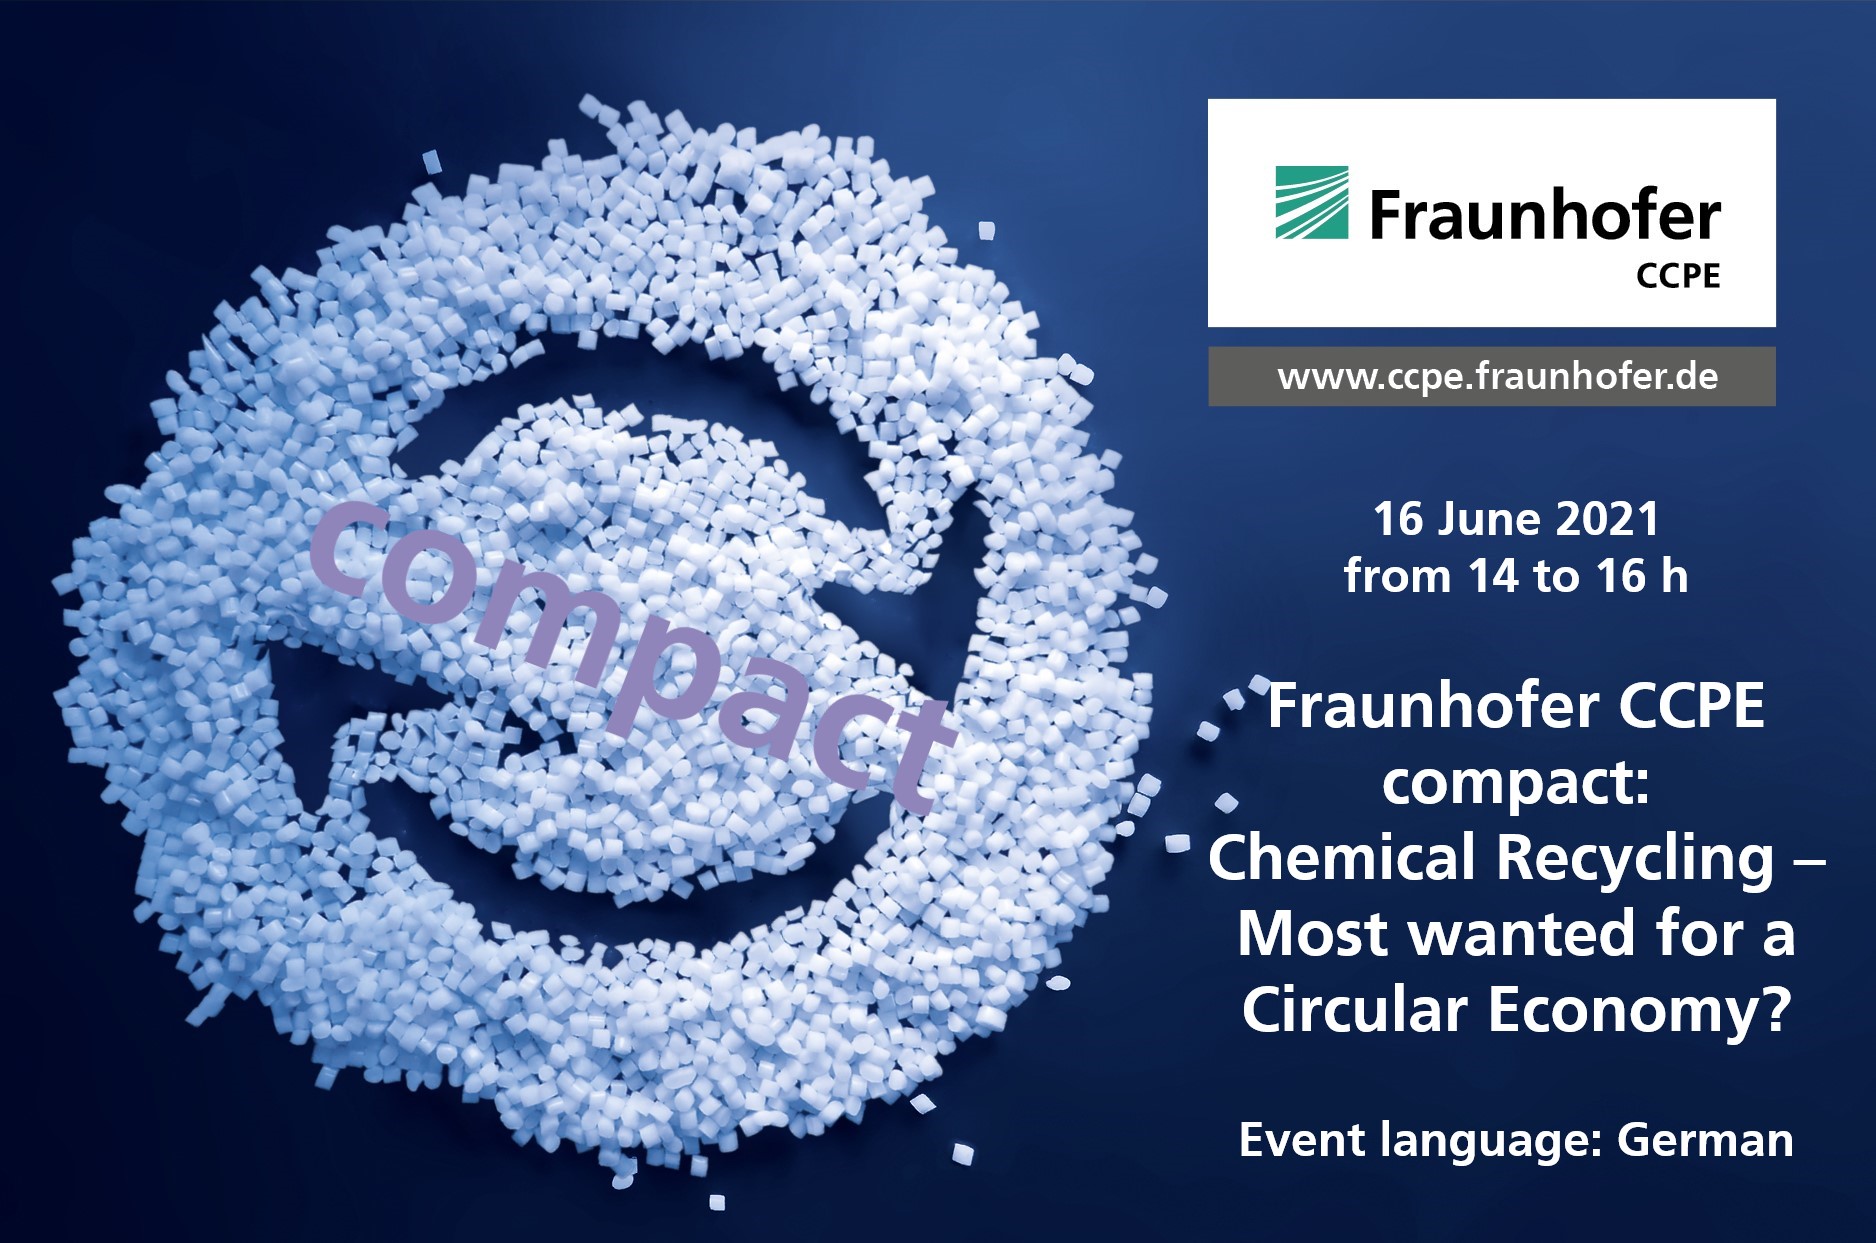  Fraunhofer CCPE compact: Chemical Recycling – Most wanted for a Circular Economy?